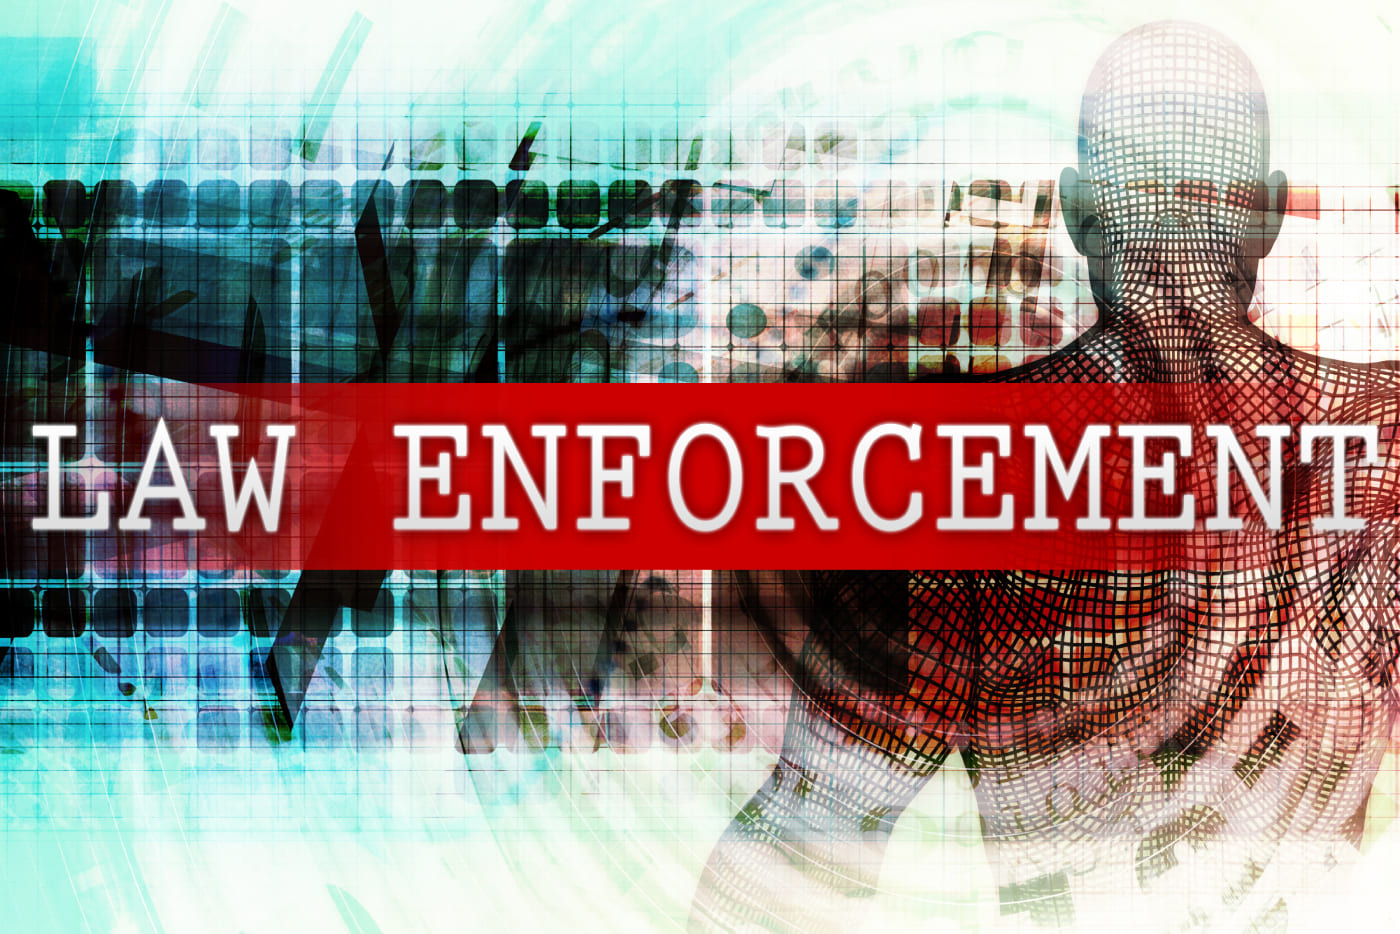 The 5 Biggest Tech Trends In Policing And Law Enforcement | Bernard Marr